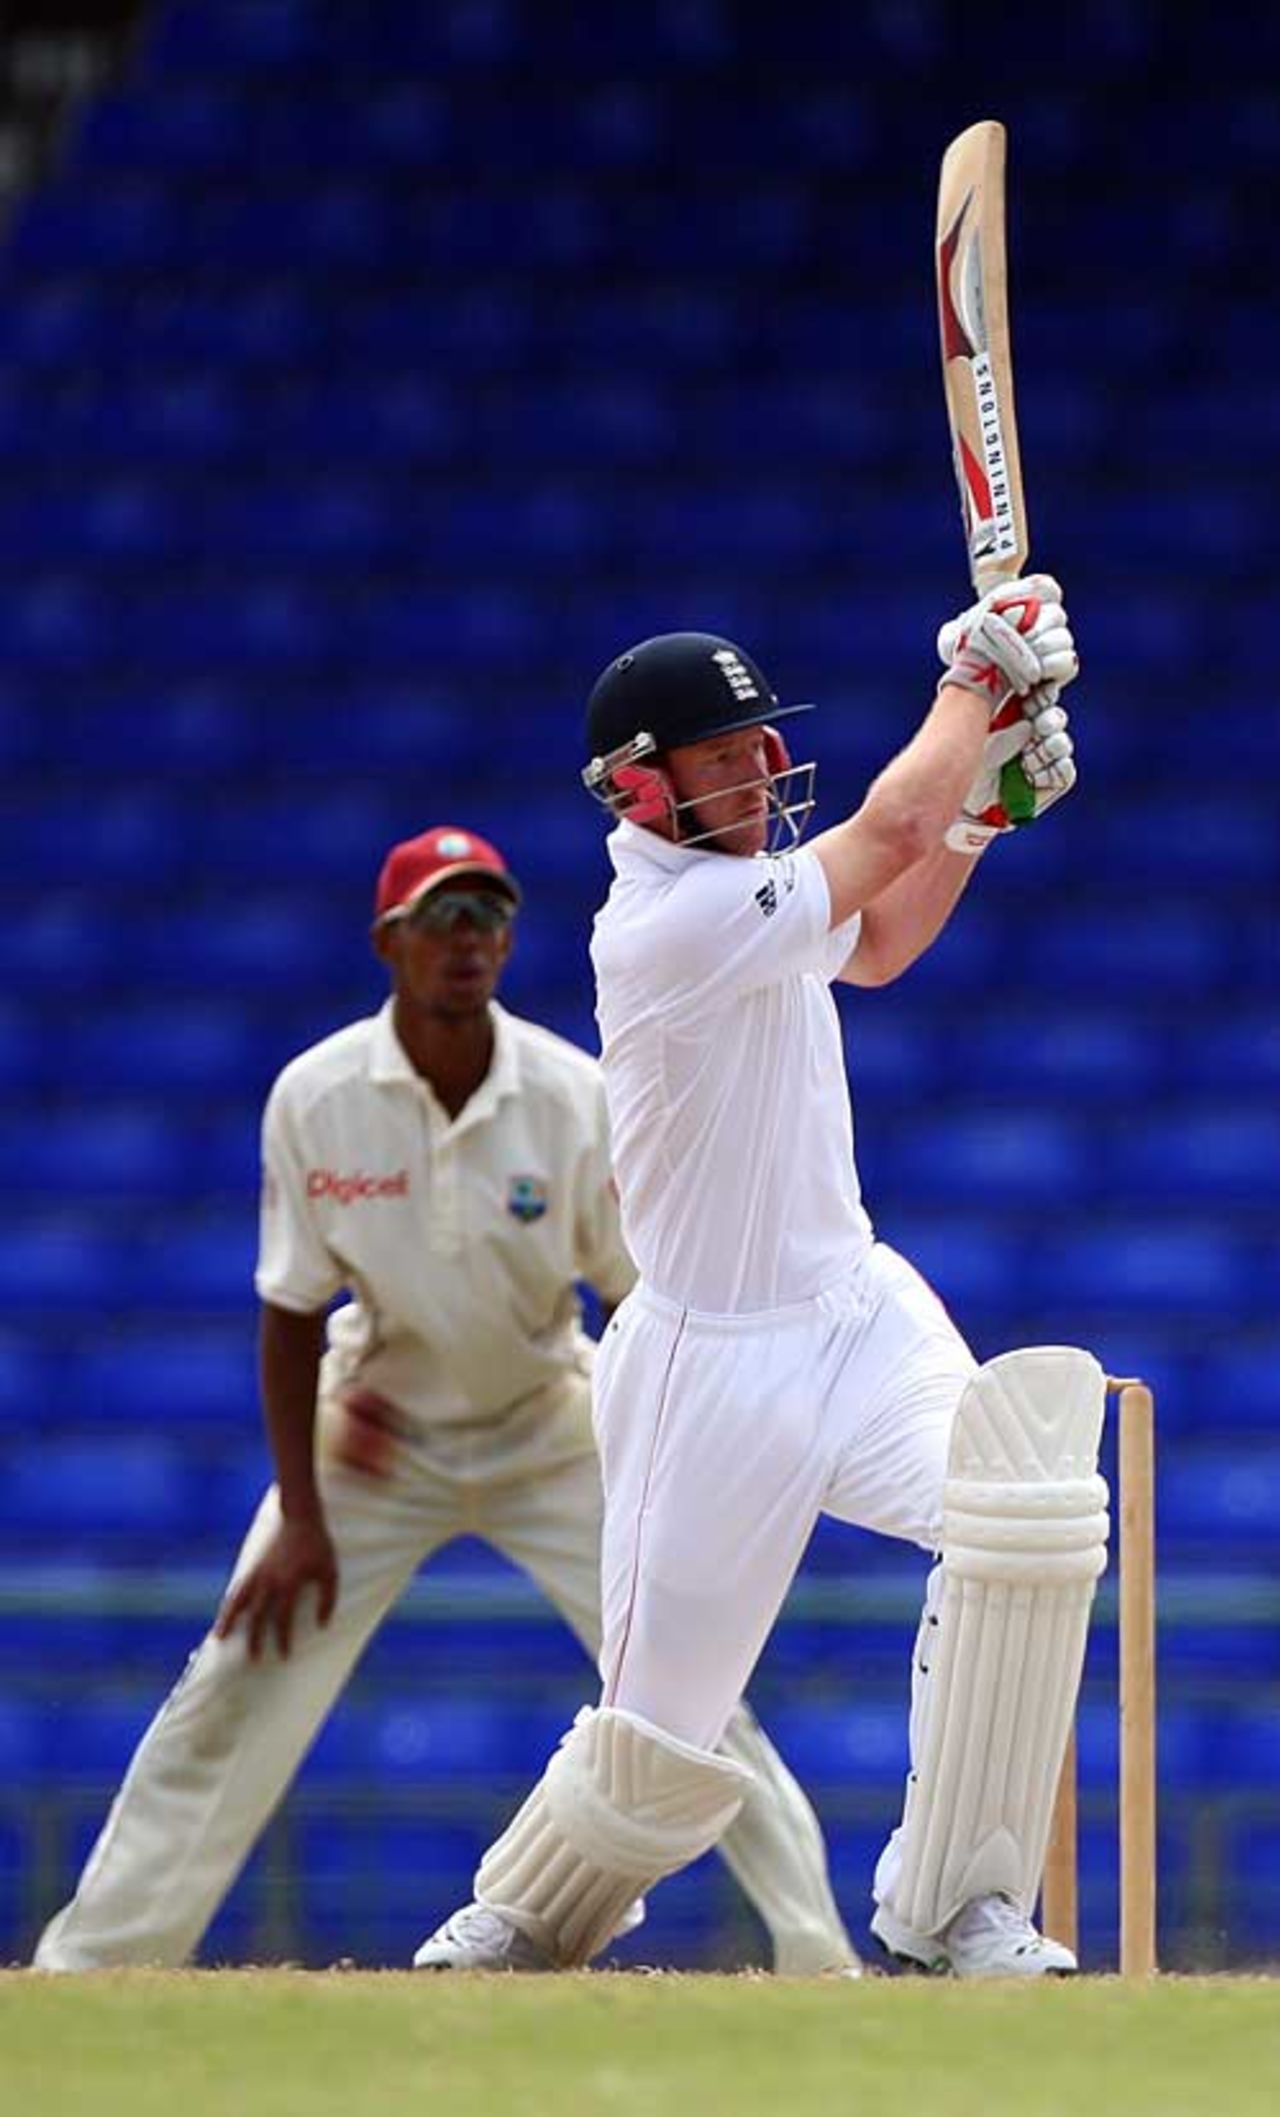 Paul Collingwood spent some valuable time in the middle, West Indies A v England XI, Warner Park, January 31, 2009